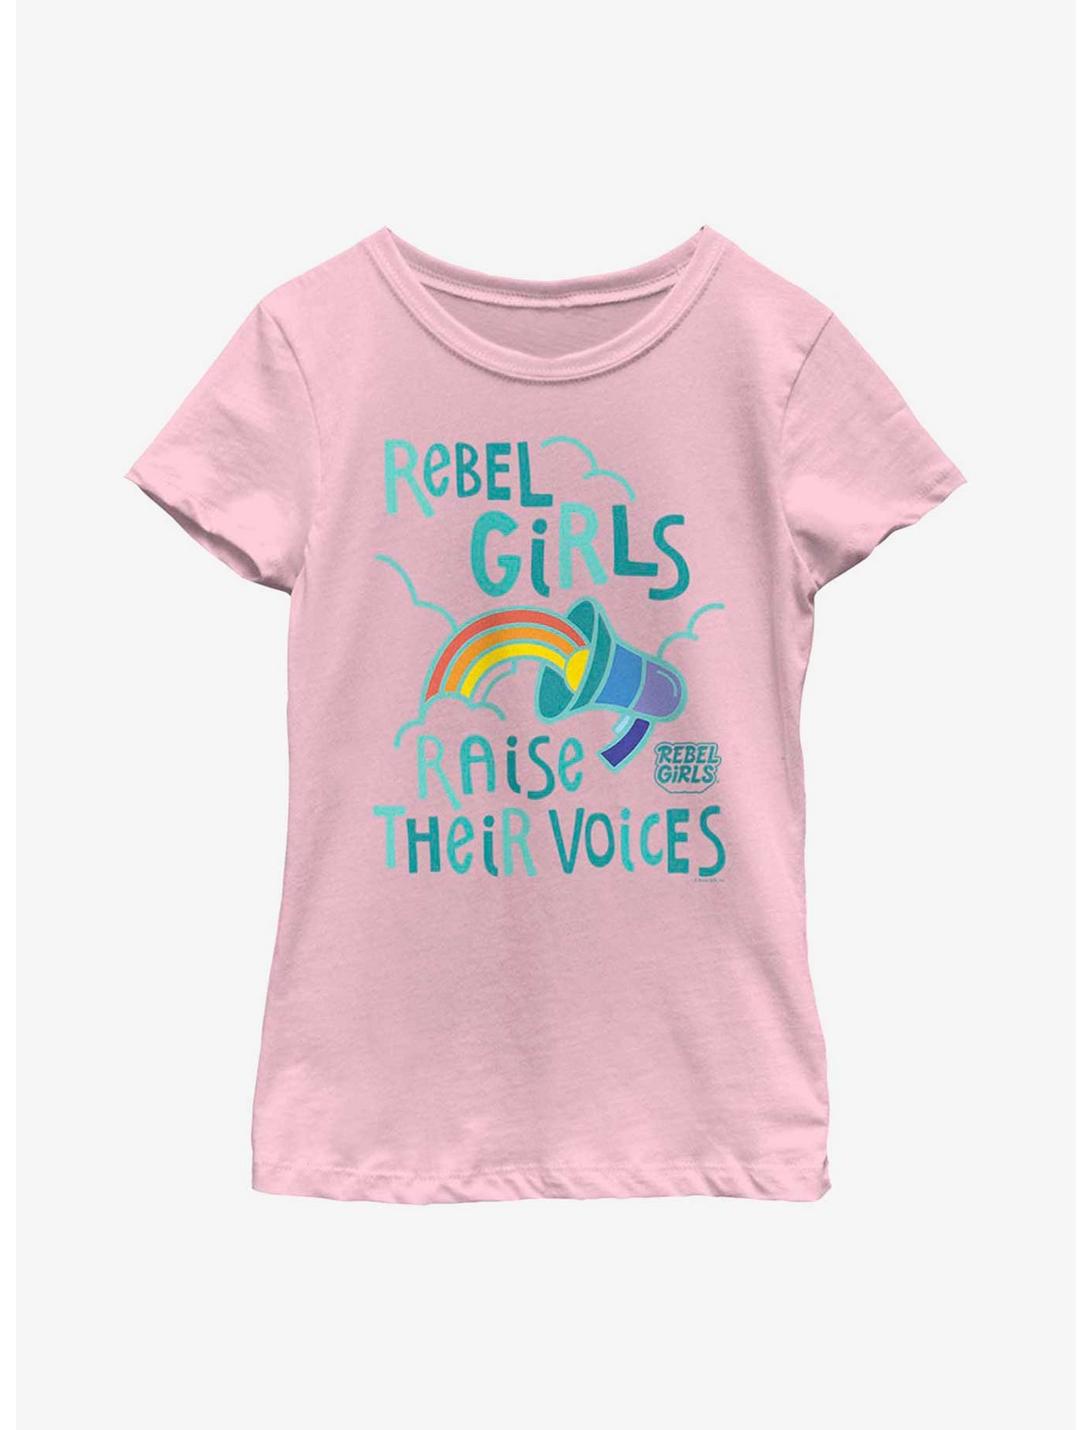 Rebel Girls Raise Their Voices Youth Girls T-Shirt, PINK, hi-res